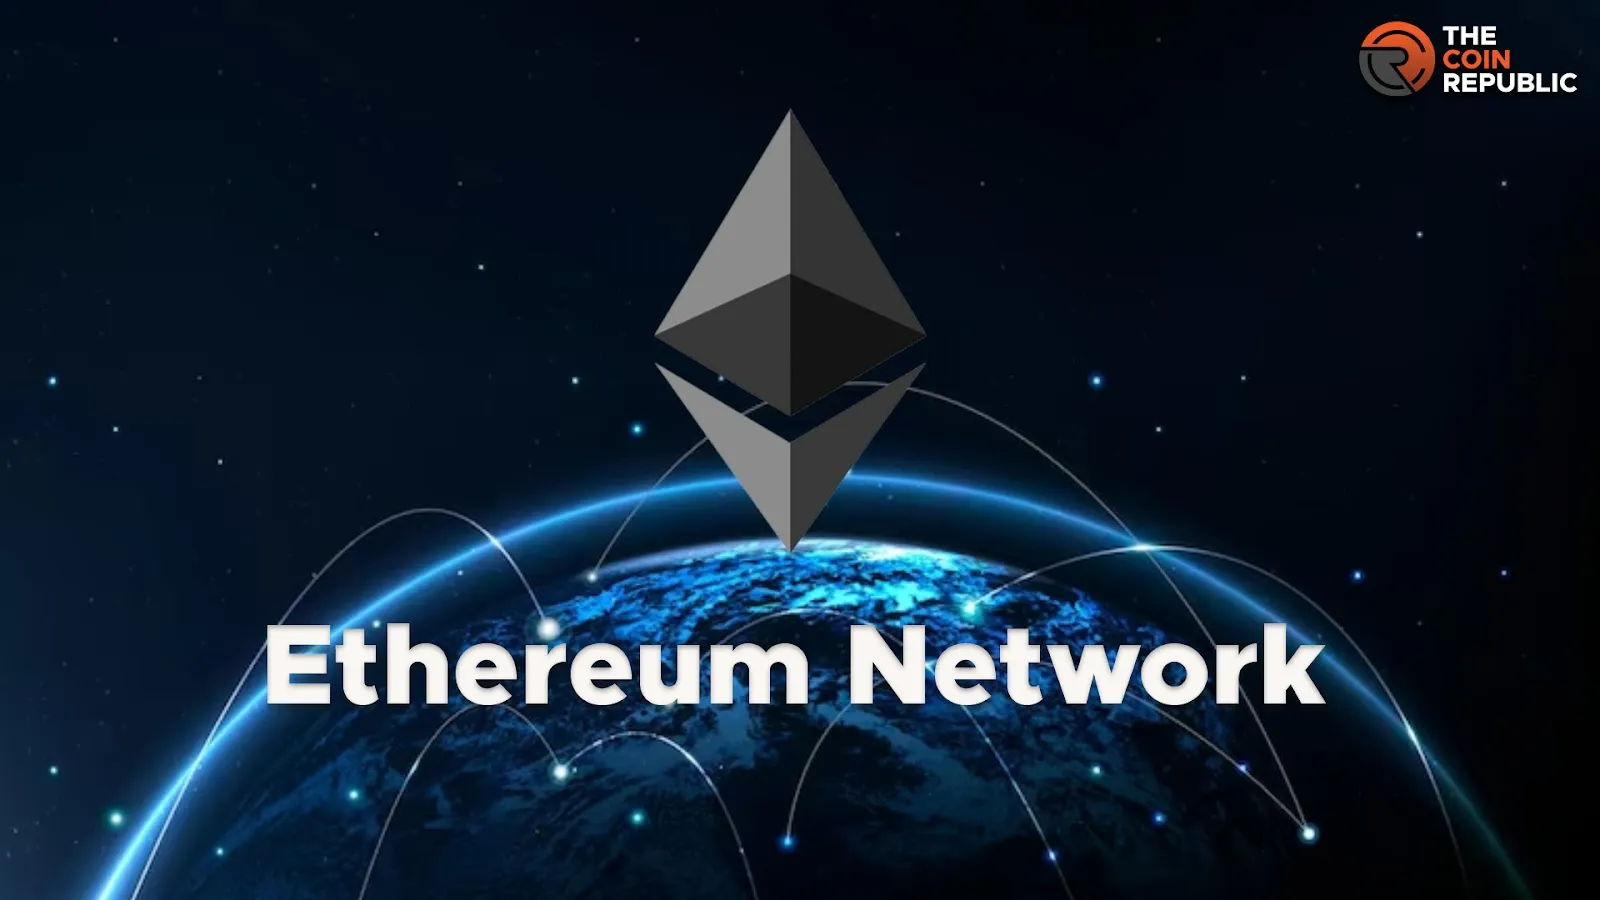 Ethereum network faces finality issues which make Blockchain insecure